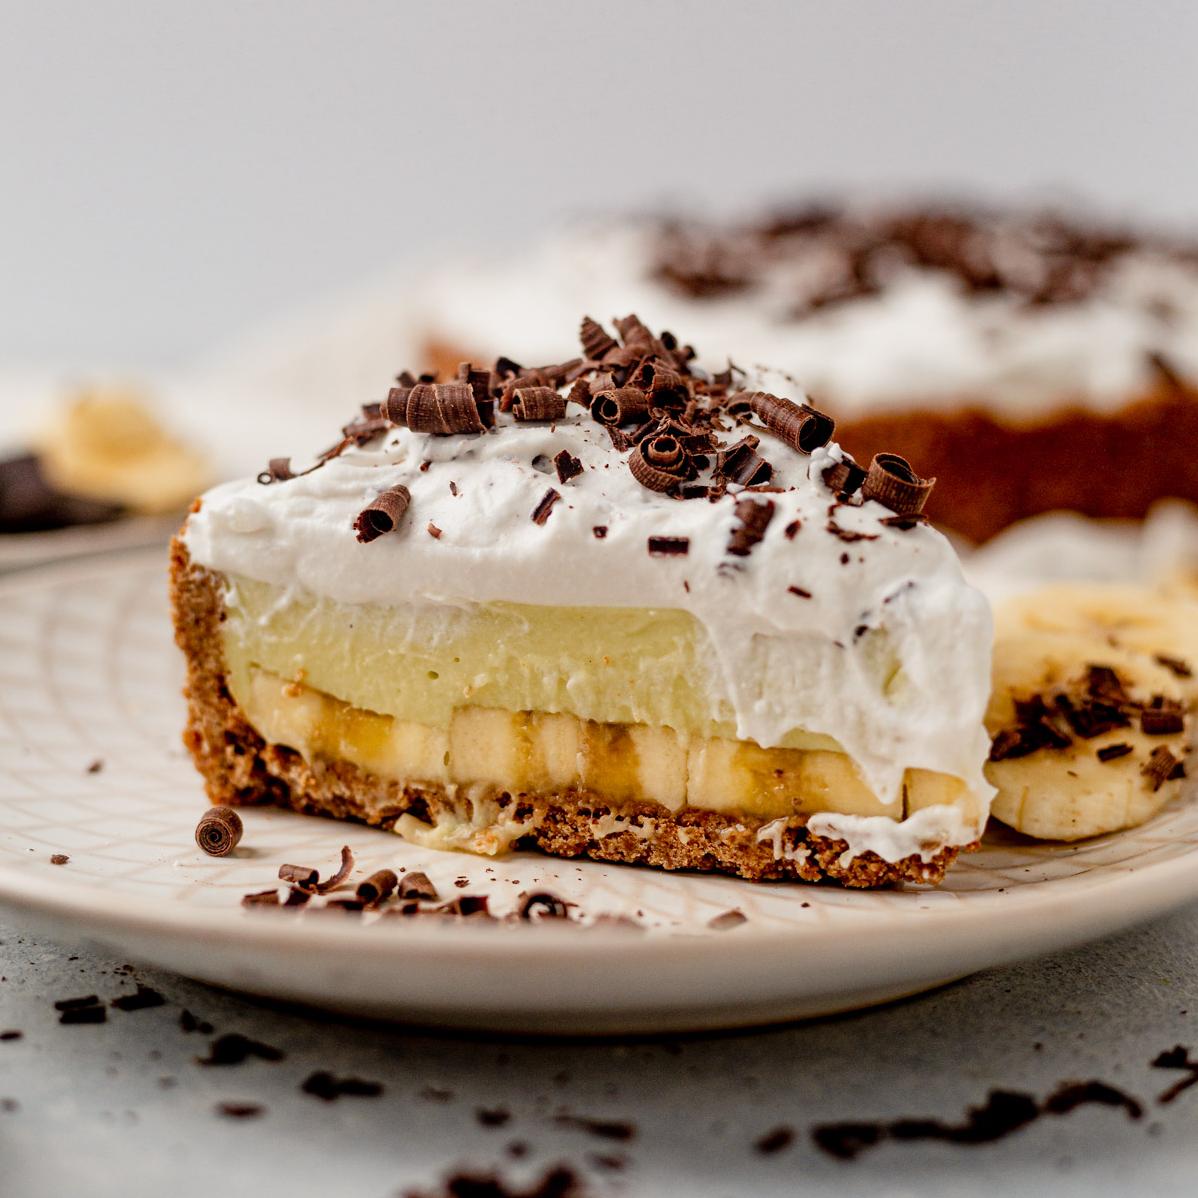  Just one bite and you'll fall head over heels for this vegan banana cream pie.